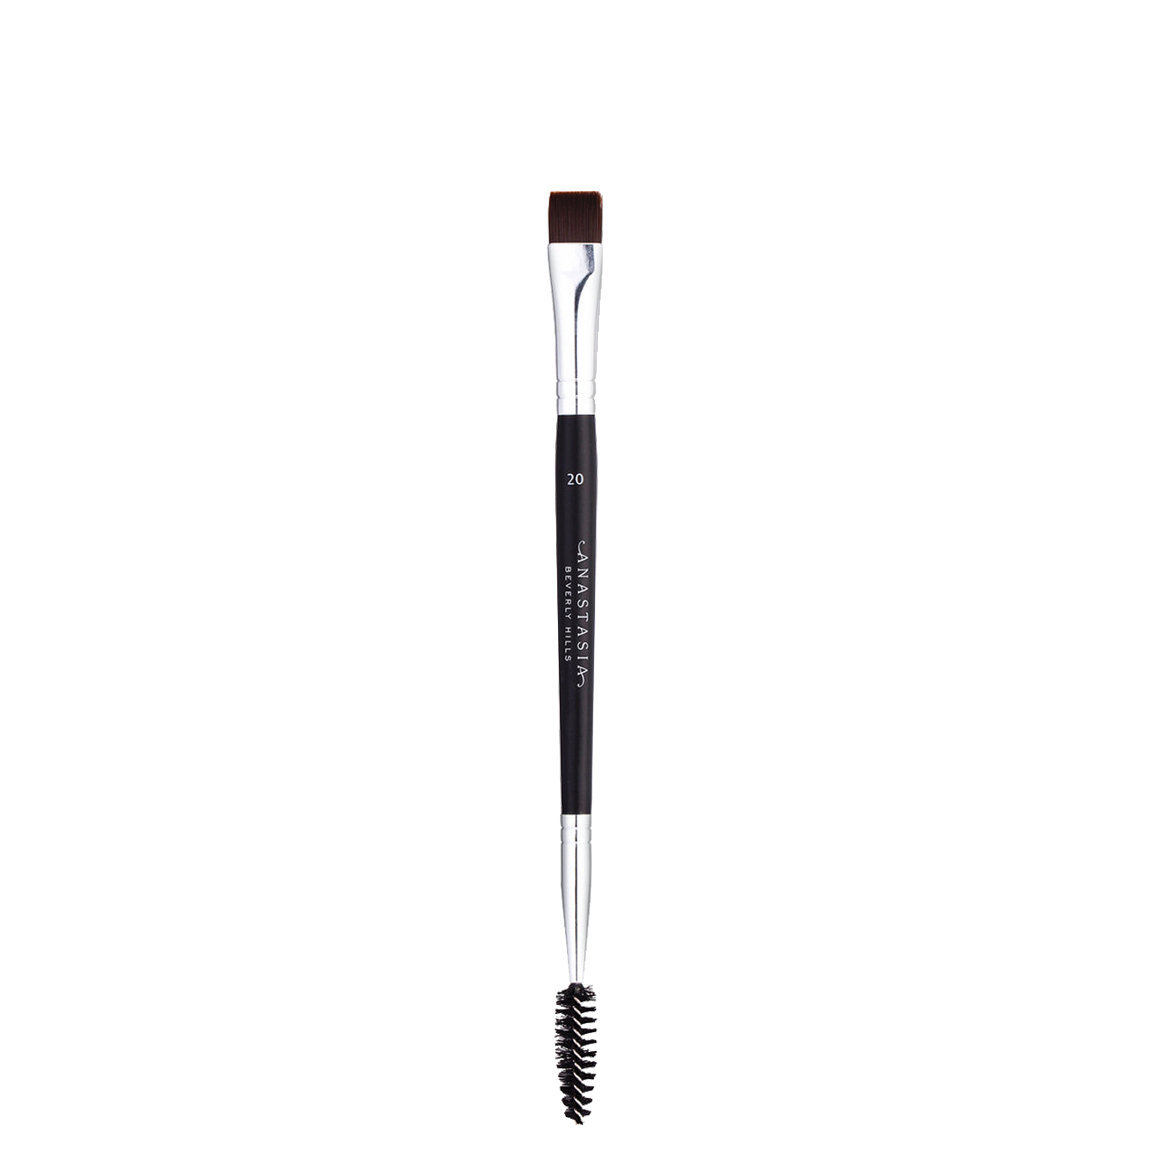 Anastasia Beverly Hills Brush 20 Dual-Ended Flat Detail Brush alternative view 1 - product swatch.